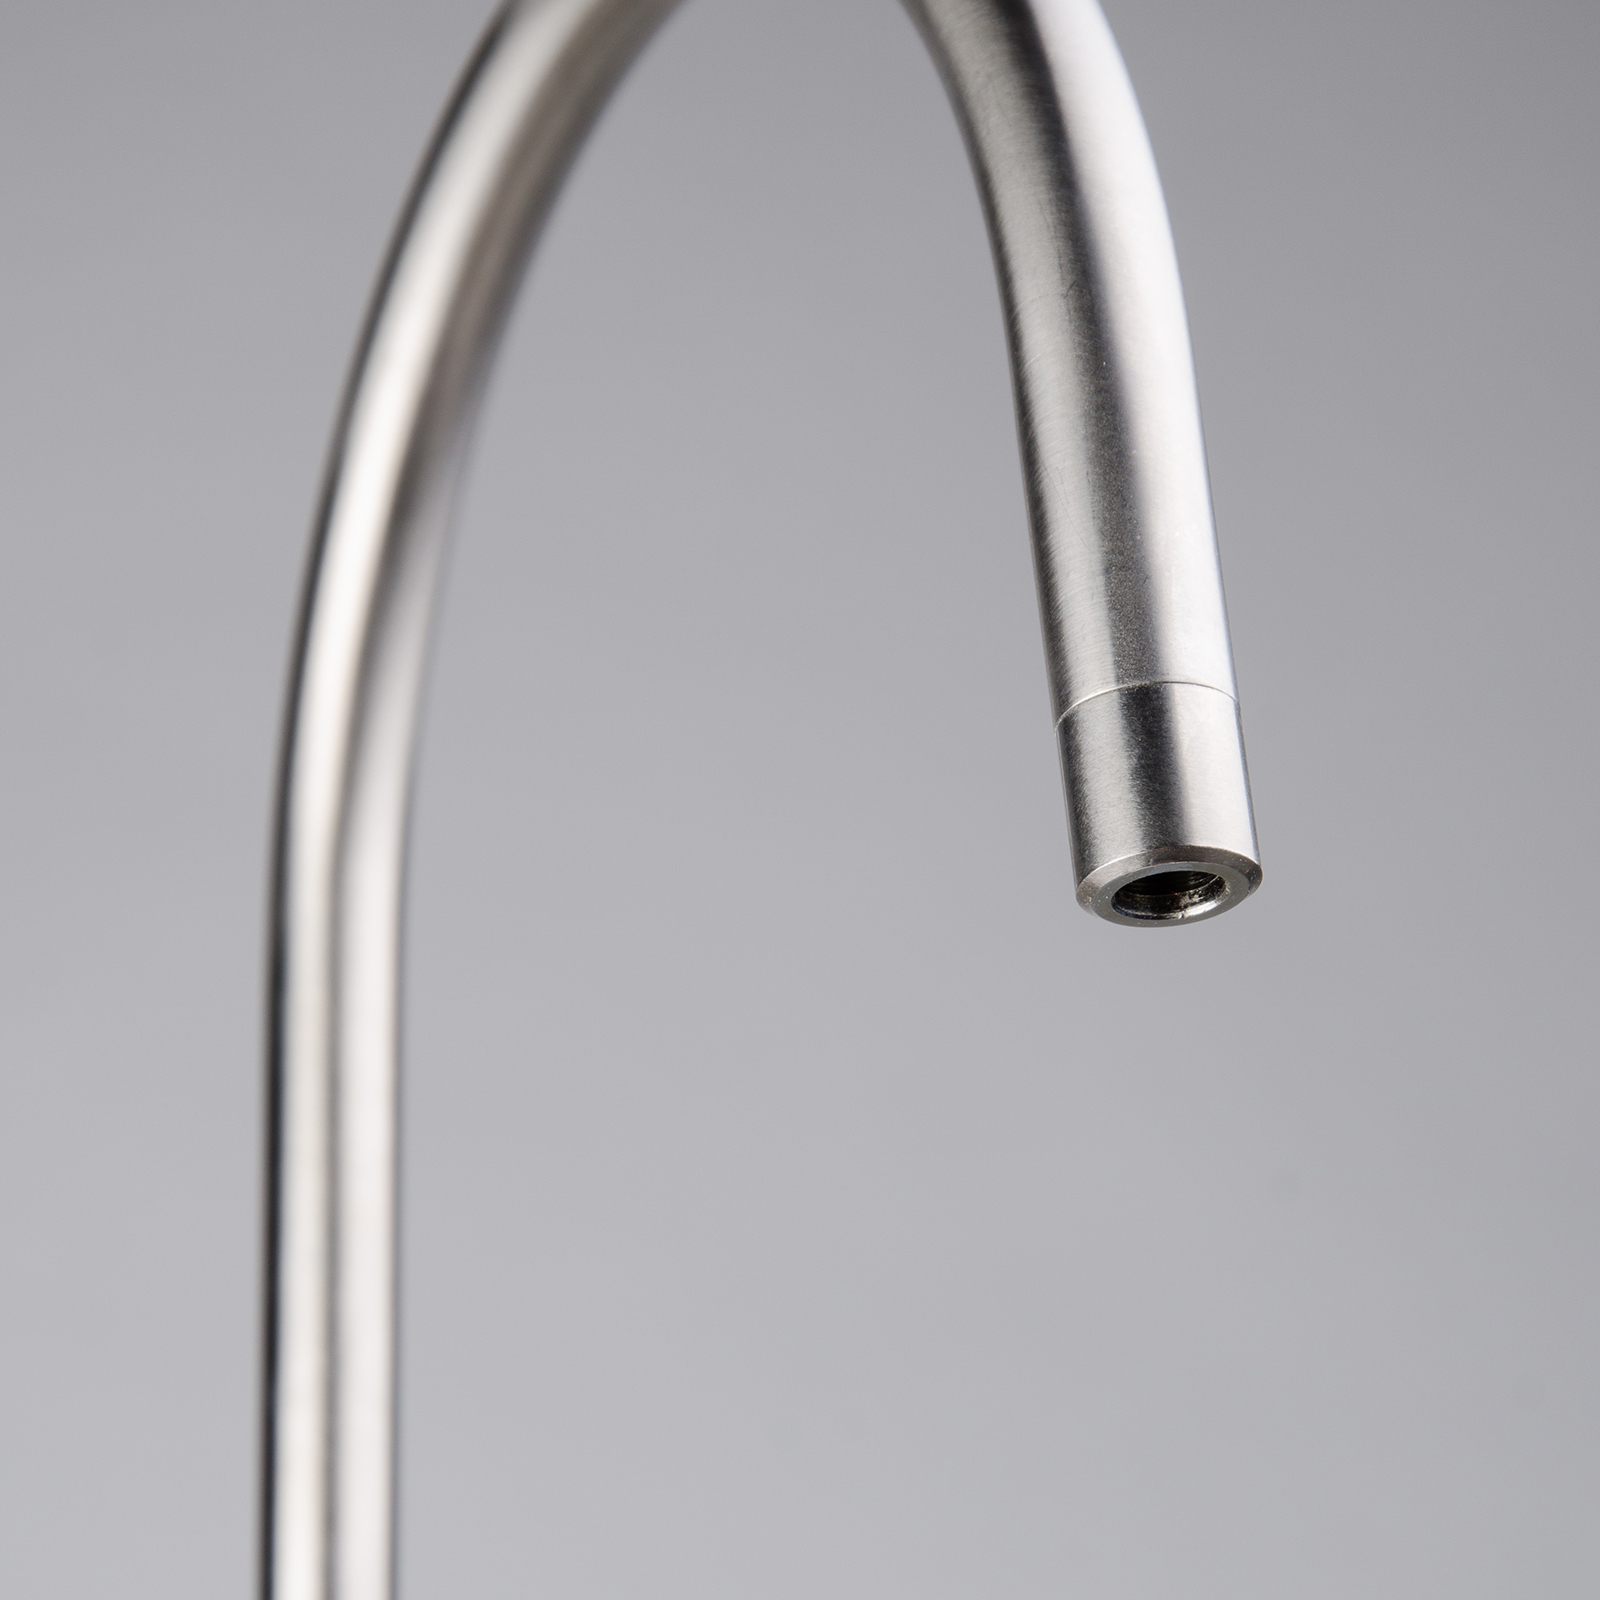 Lead free Stainless Steel faucet